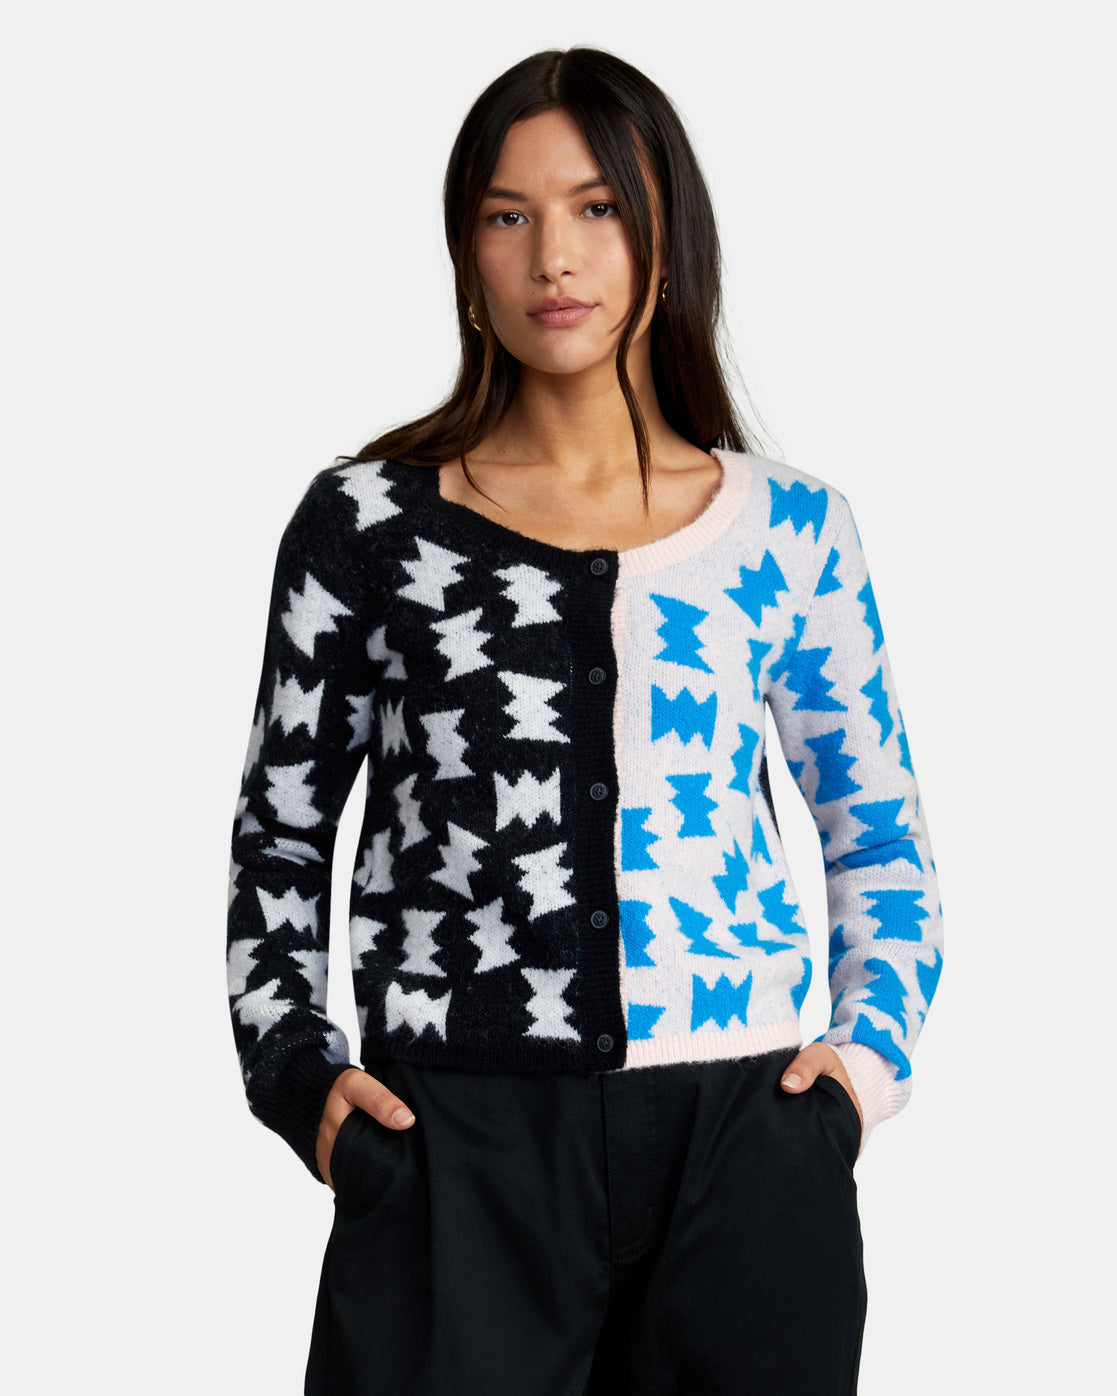 Women's Inverted Sweater